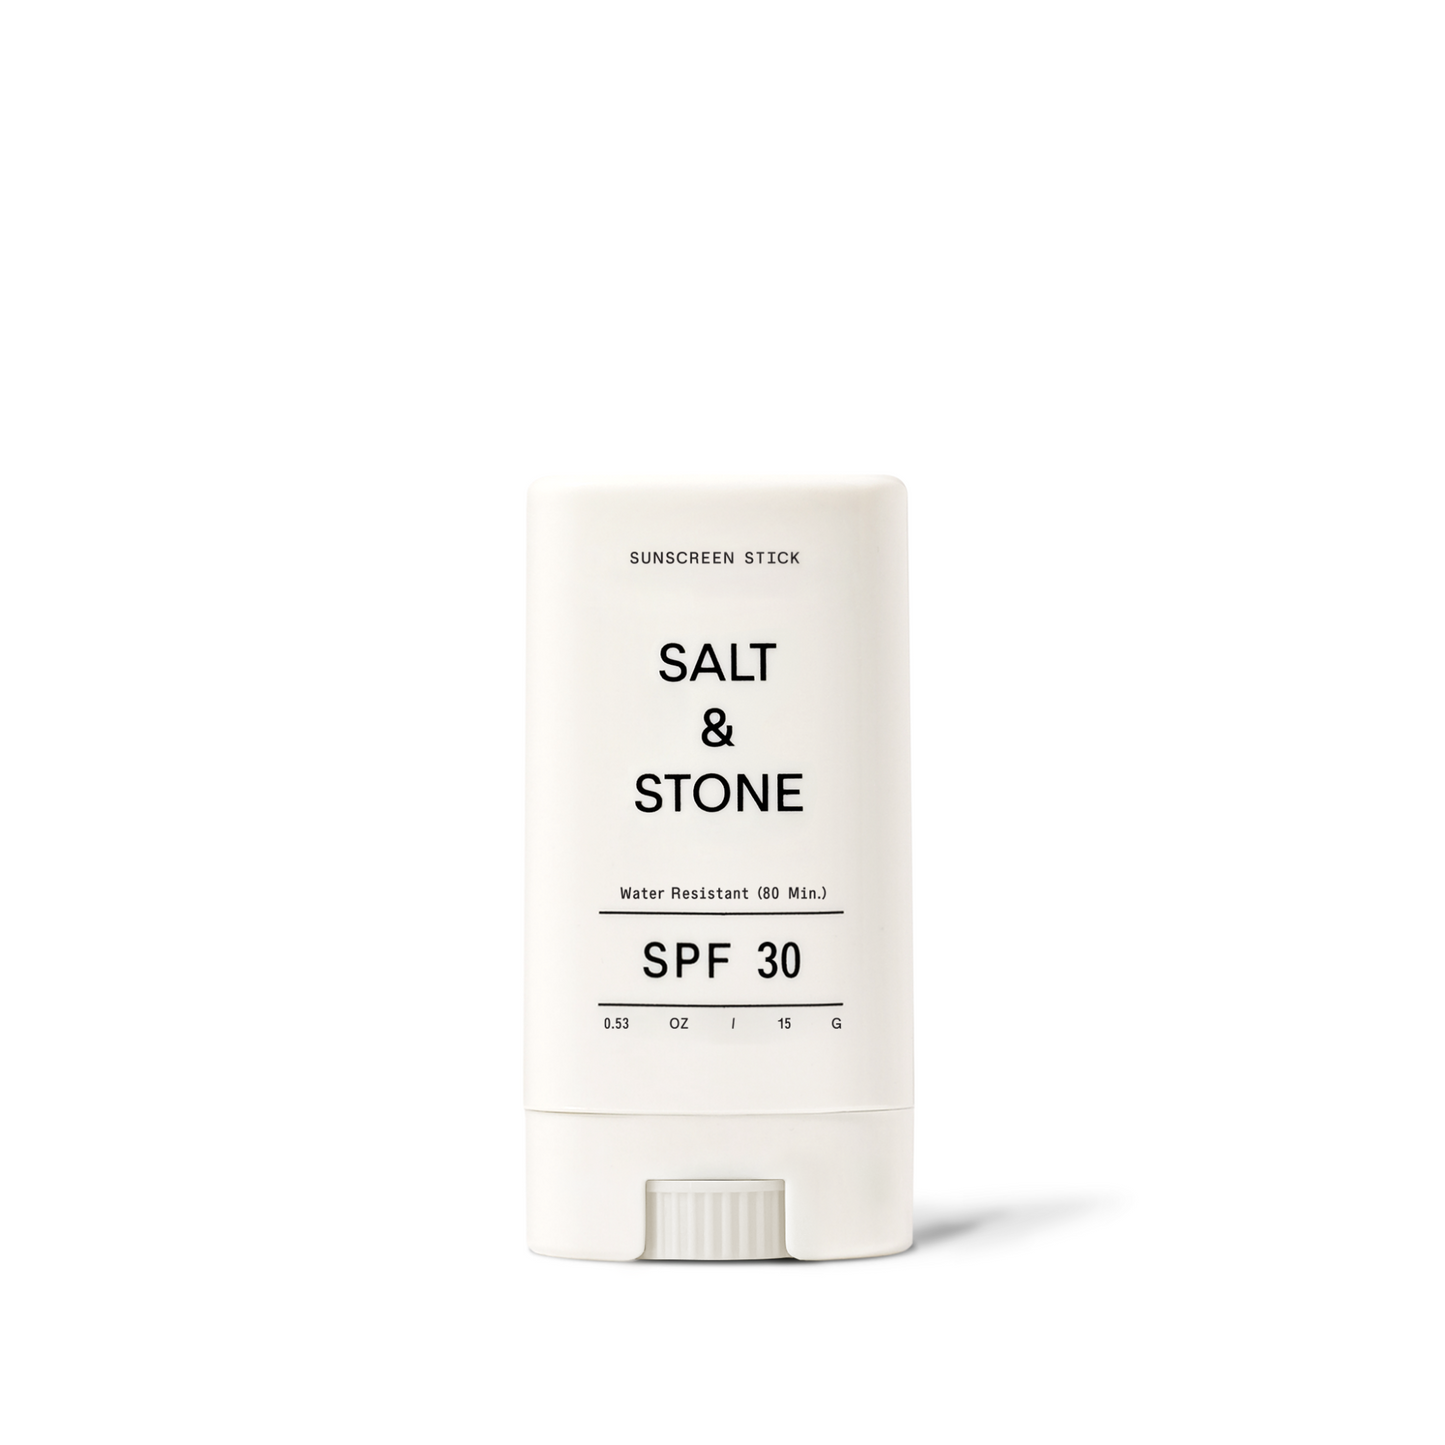 Primary Image of Sunscreen Stick SPF 30